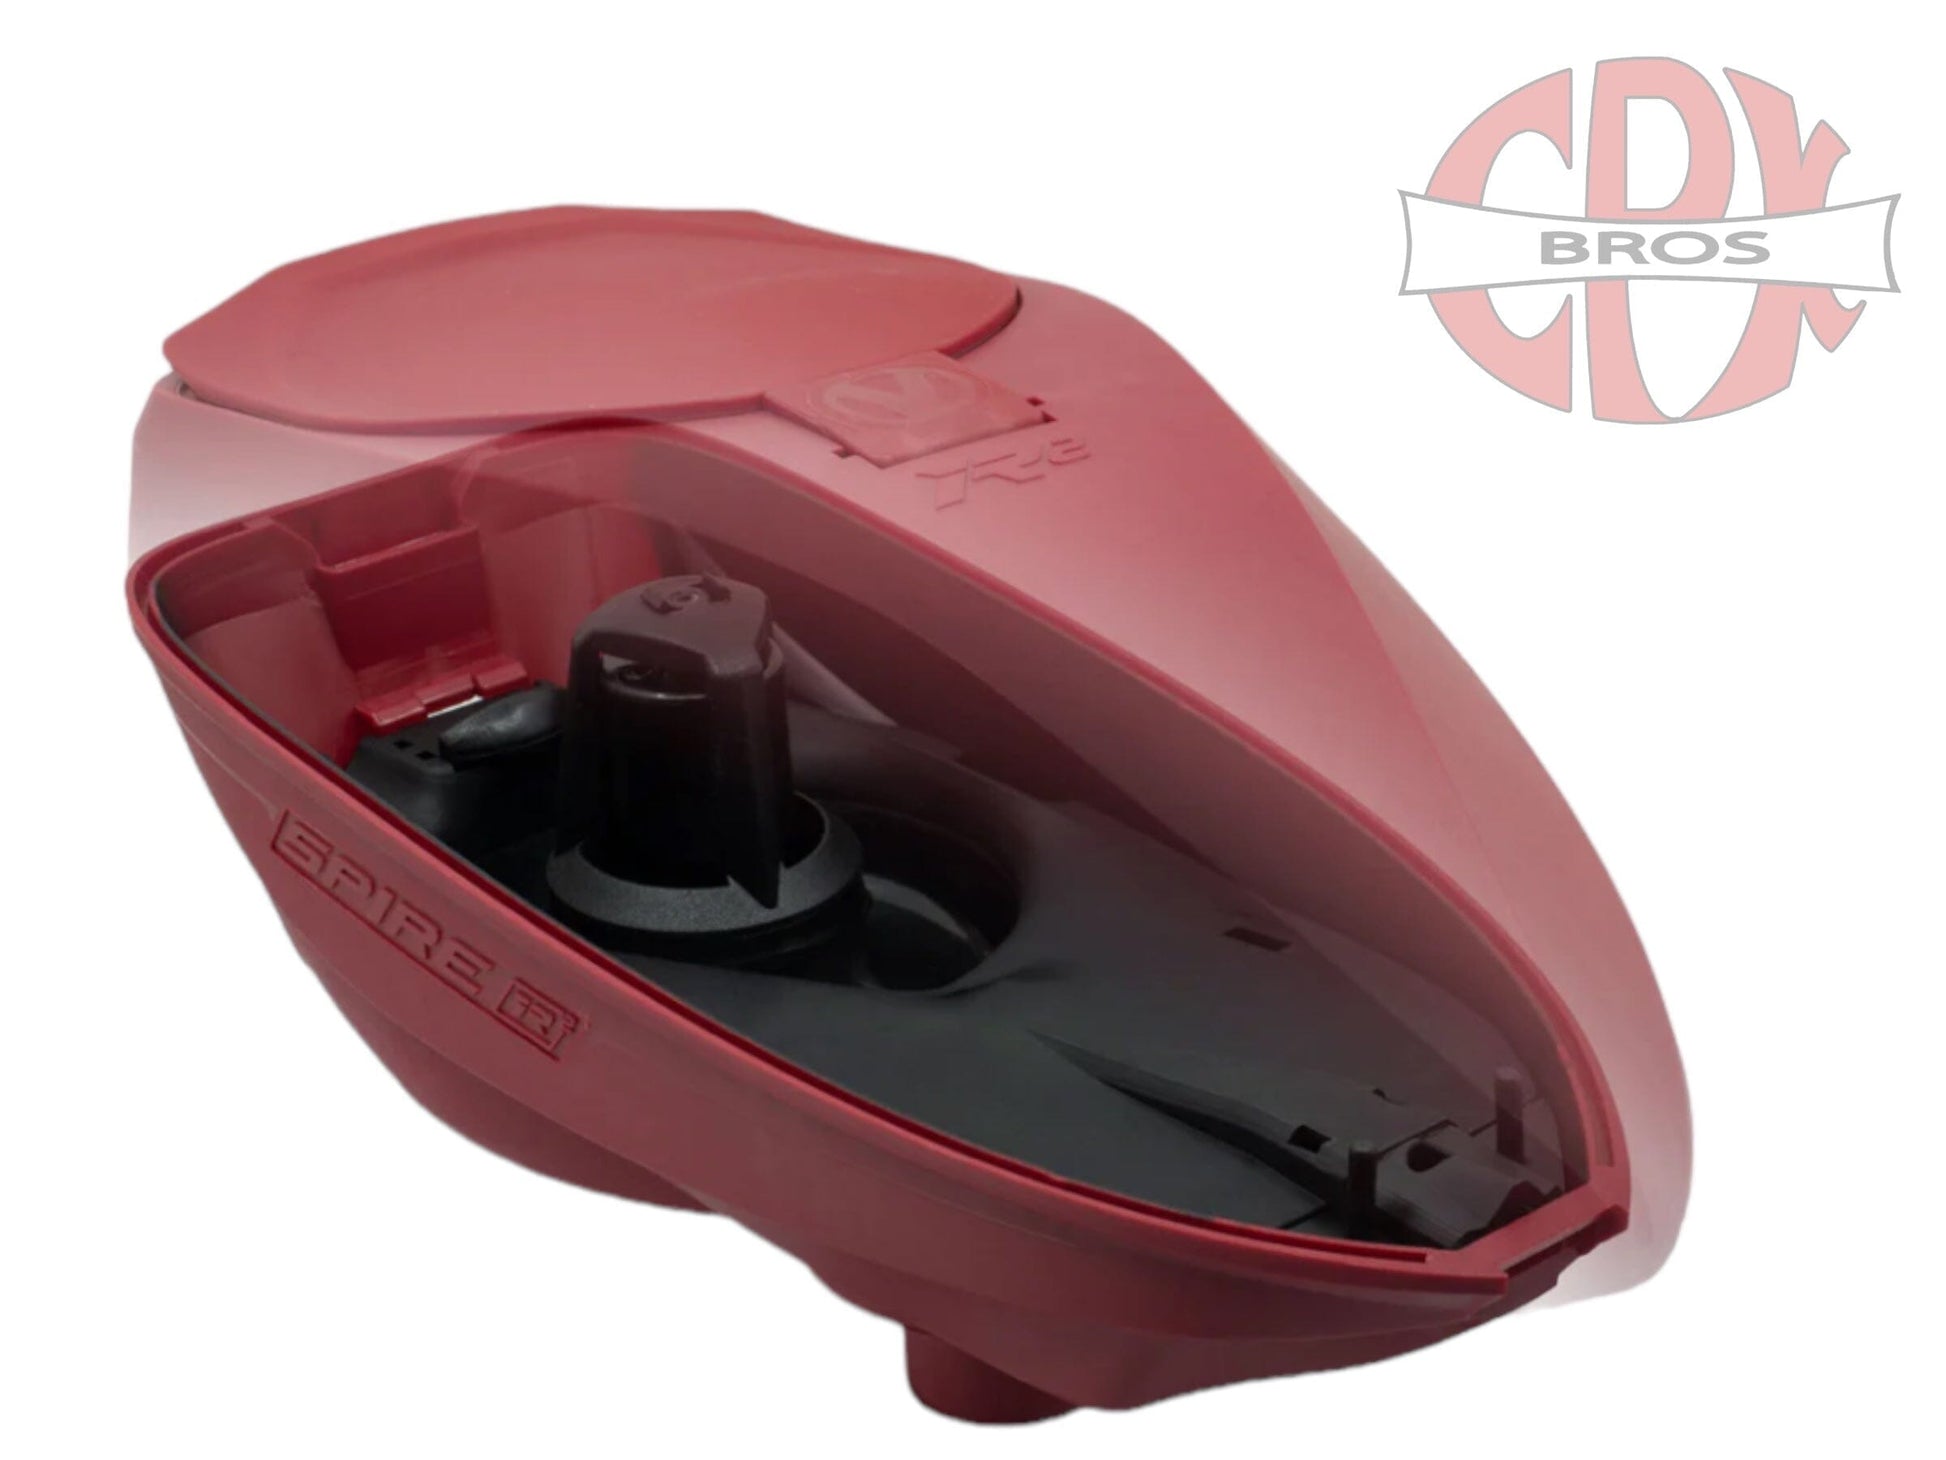 Used NEW Virtue Spire IR² Loader - Red Paintball Gun from CPXBrosPaintball Buy/Sell/Trade Paintball Markers, New Paintball Guns, Paintball Hoppers, Paintball Masks, and Hormesis Headbands